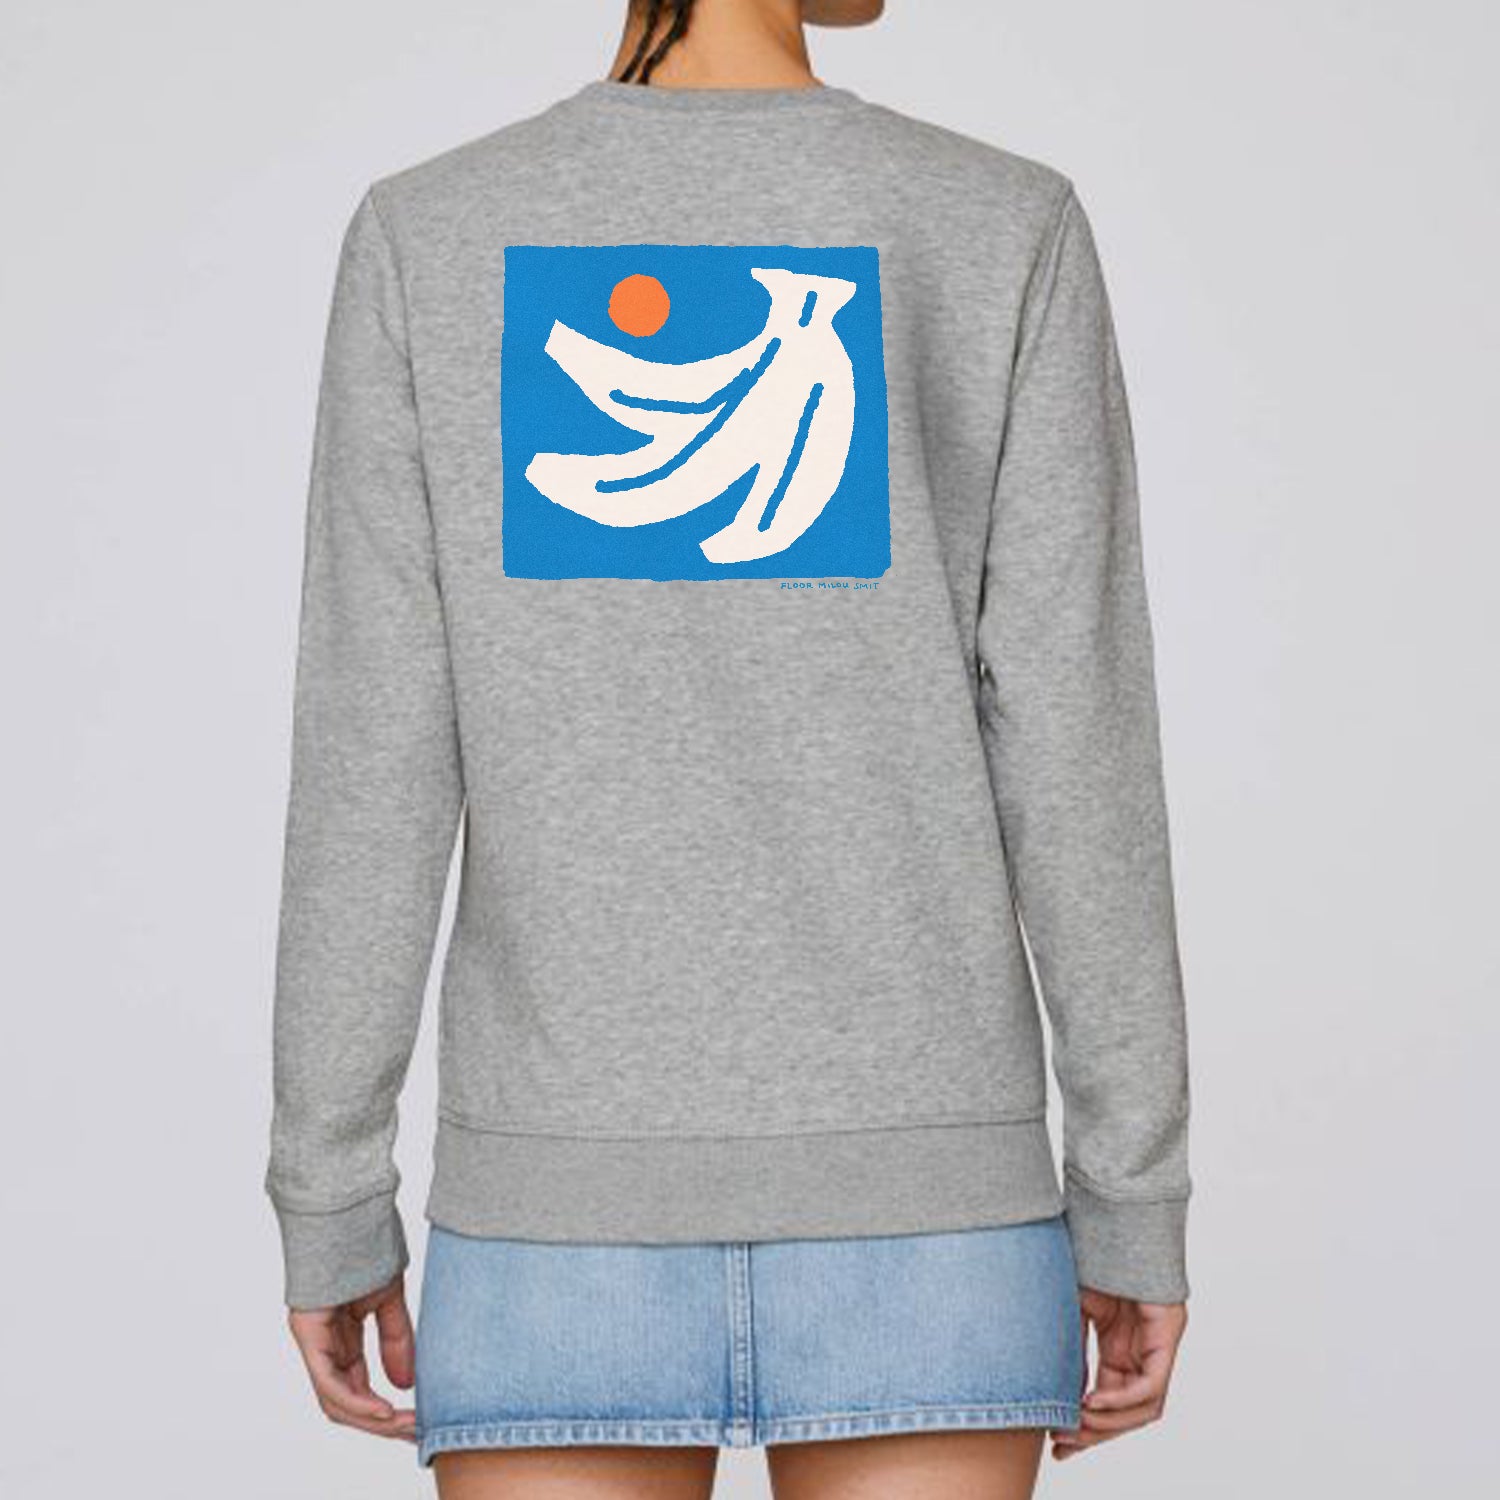 Photo of a model wearing a heather grey sweater. The print on the sweater is an off-white hand of bananas with an orange circle next to them on a blue square background.